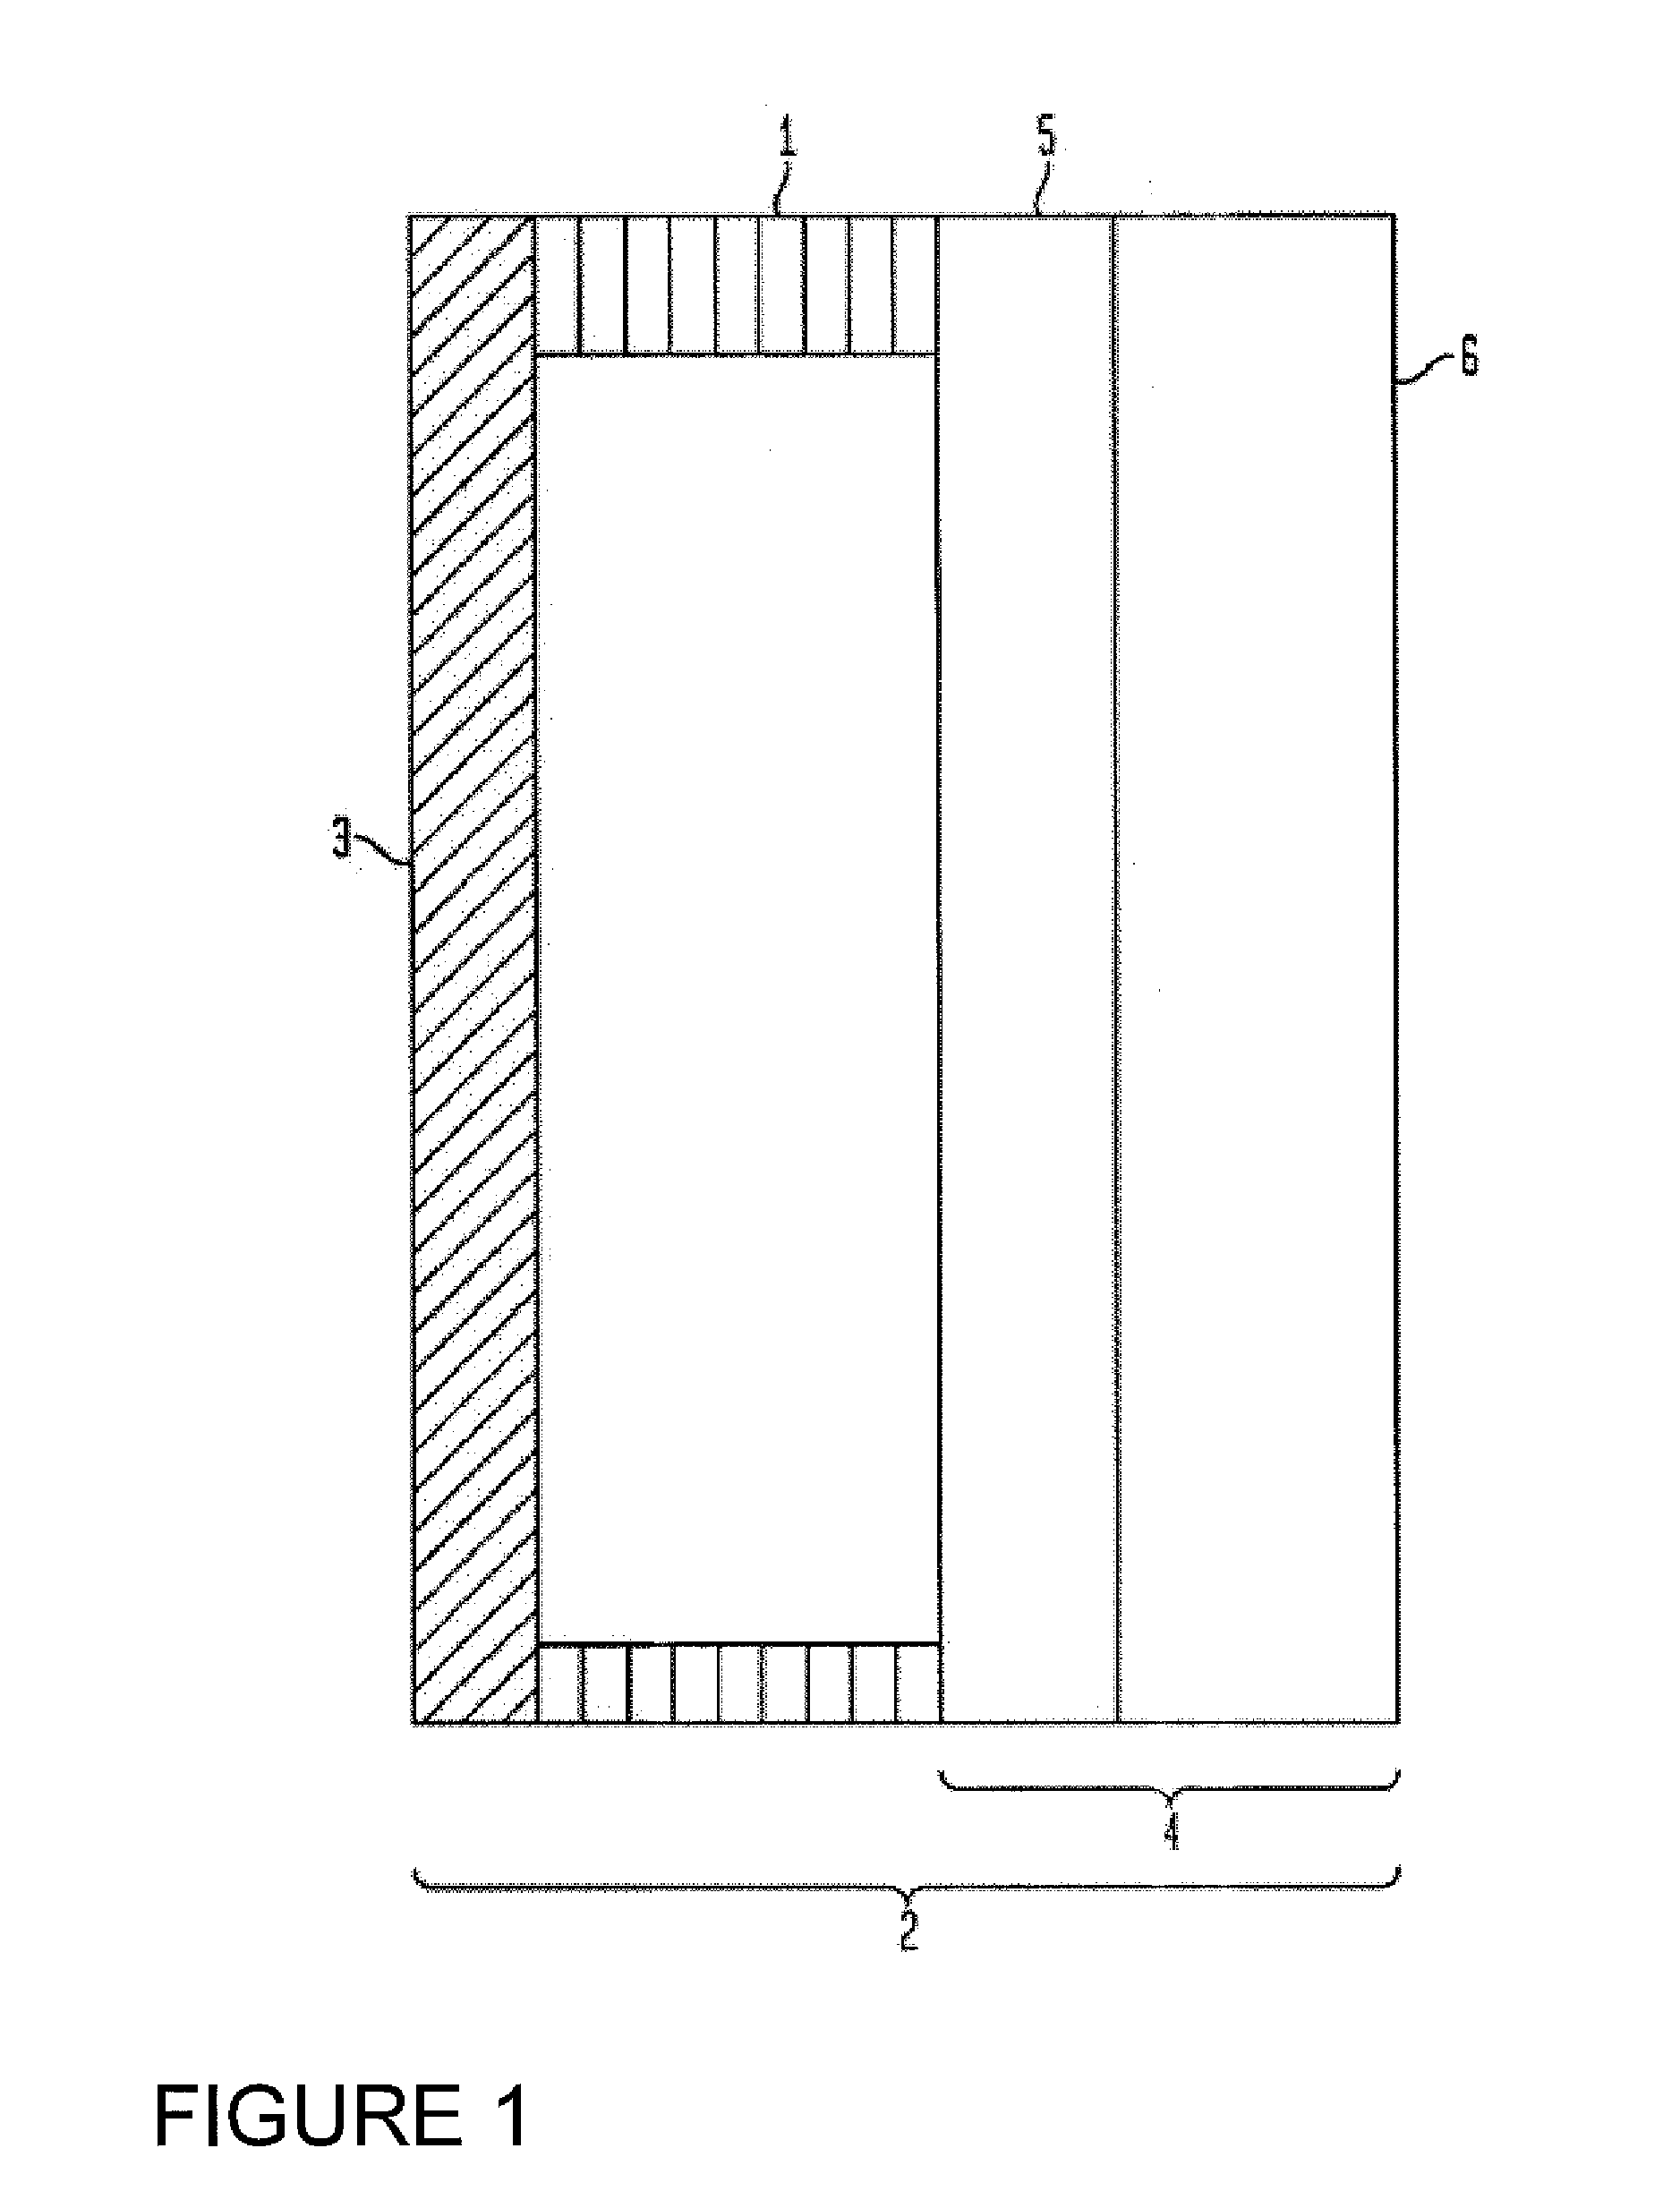 Control system trunk line architecture